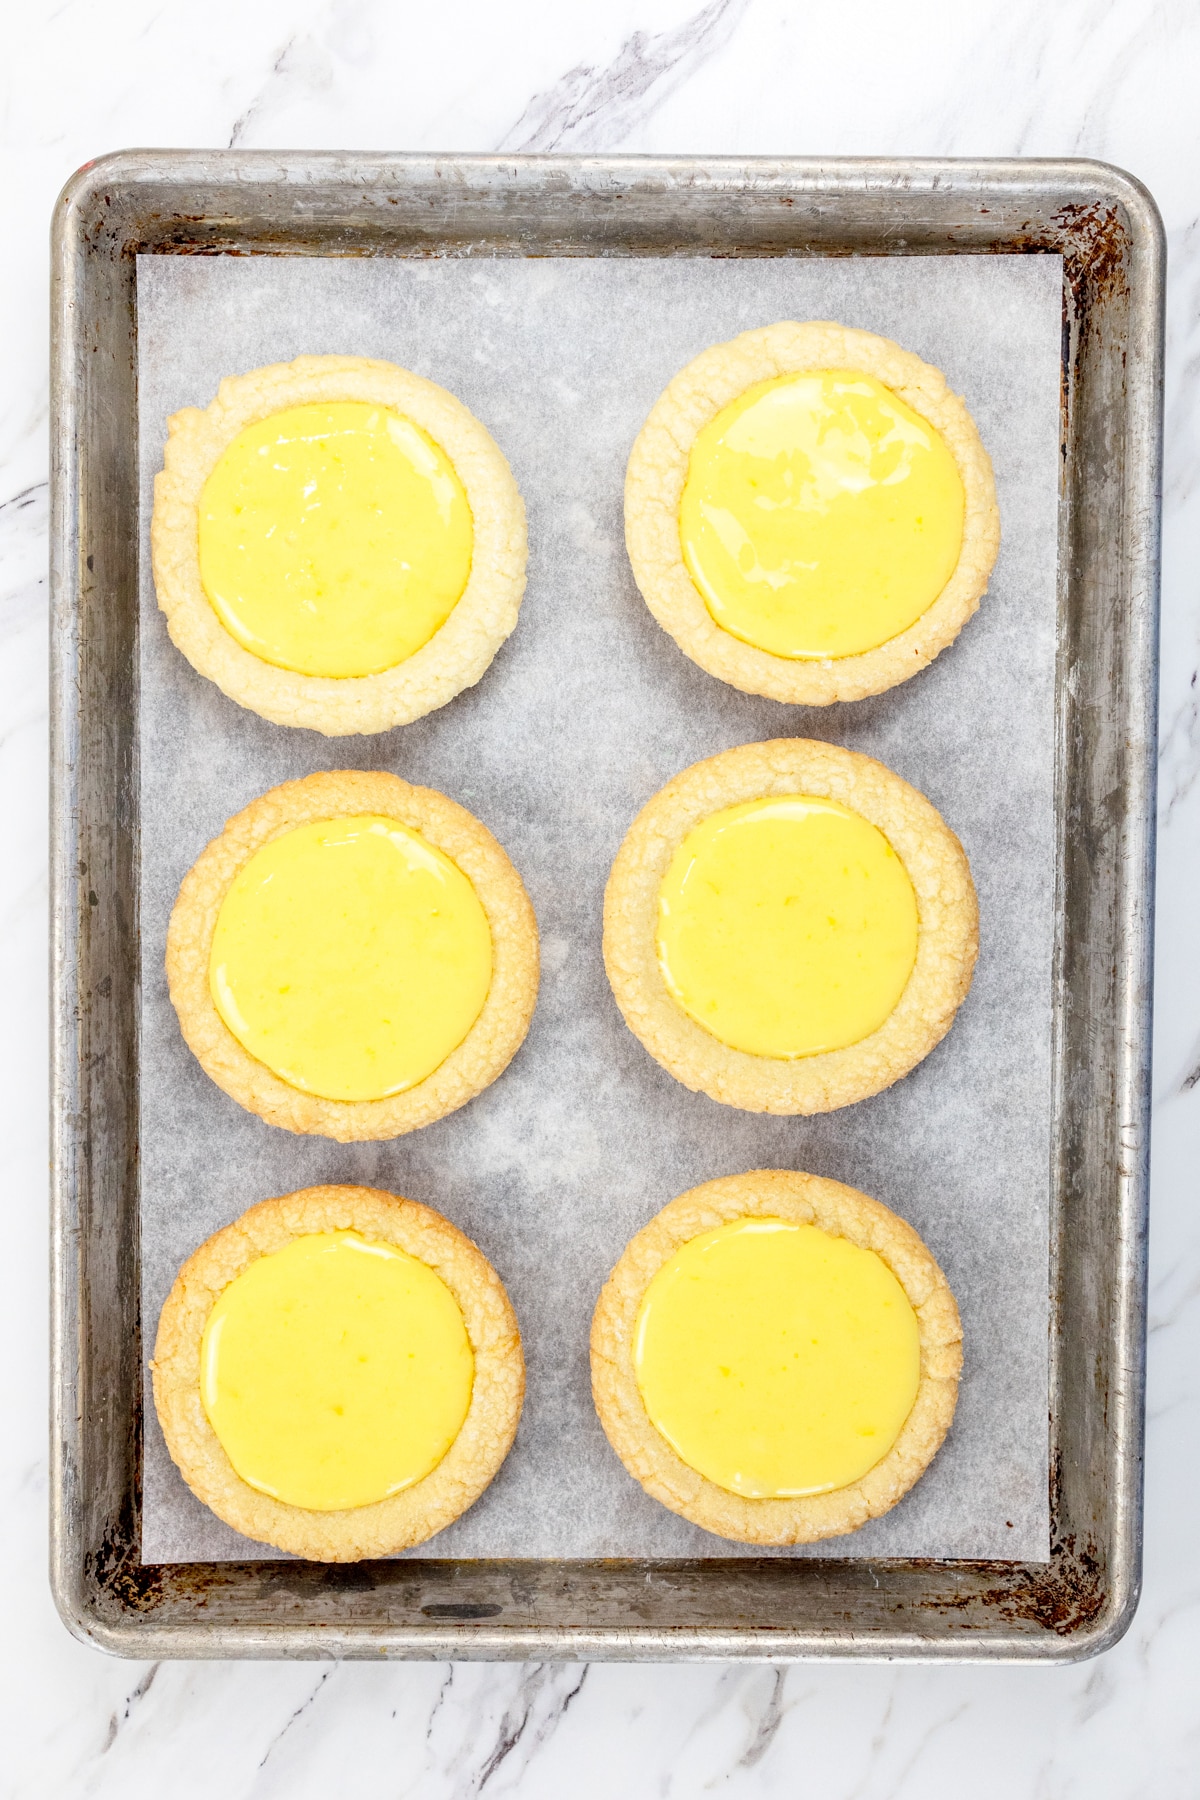 Top view of cookies filled with lemon curd filling on a baking tray lined with parchment paper.